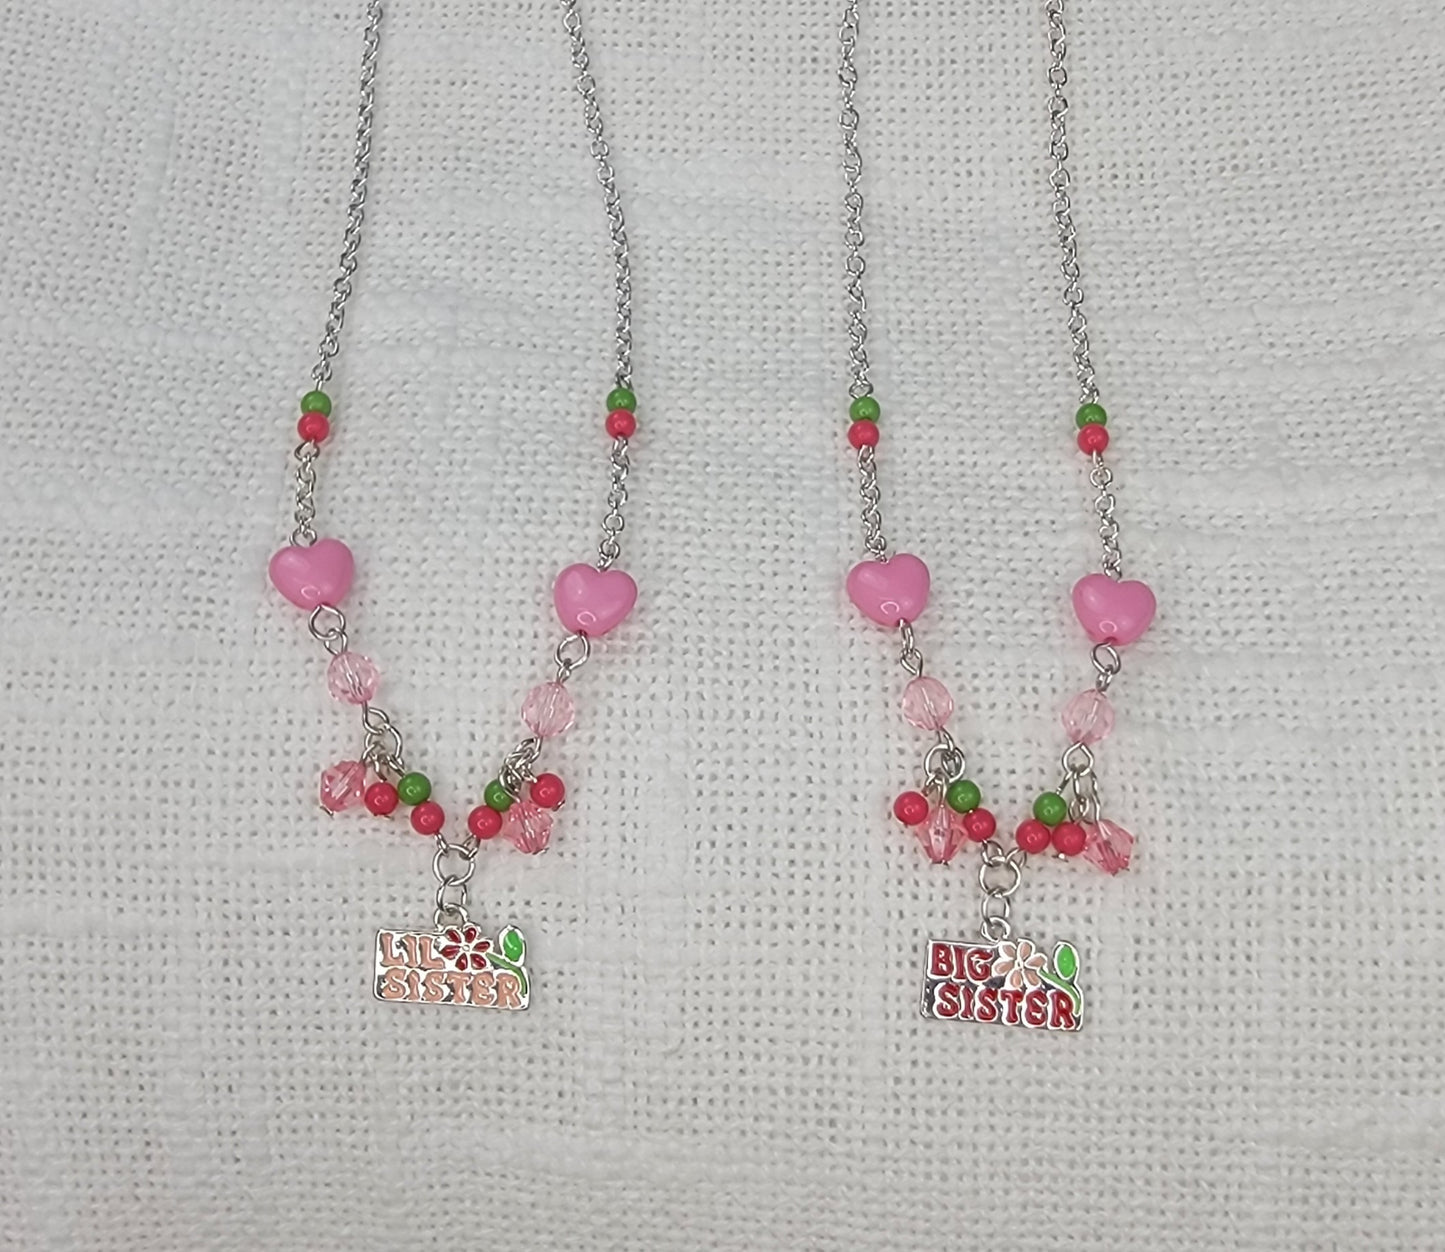 Girls Charm Jewelry: Big Sister/Little Sister Sets